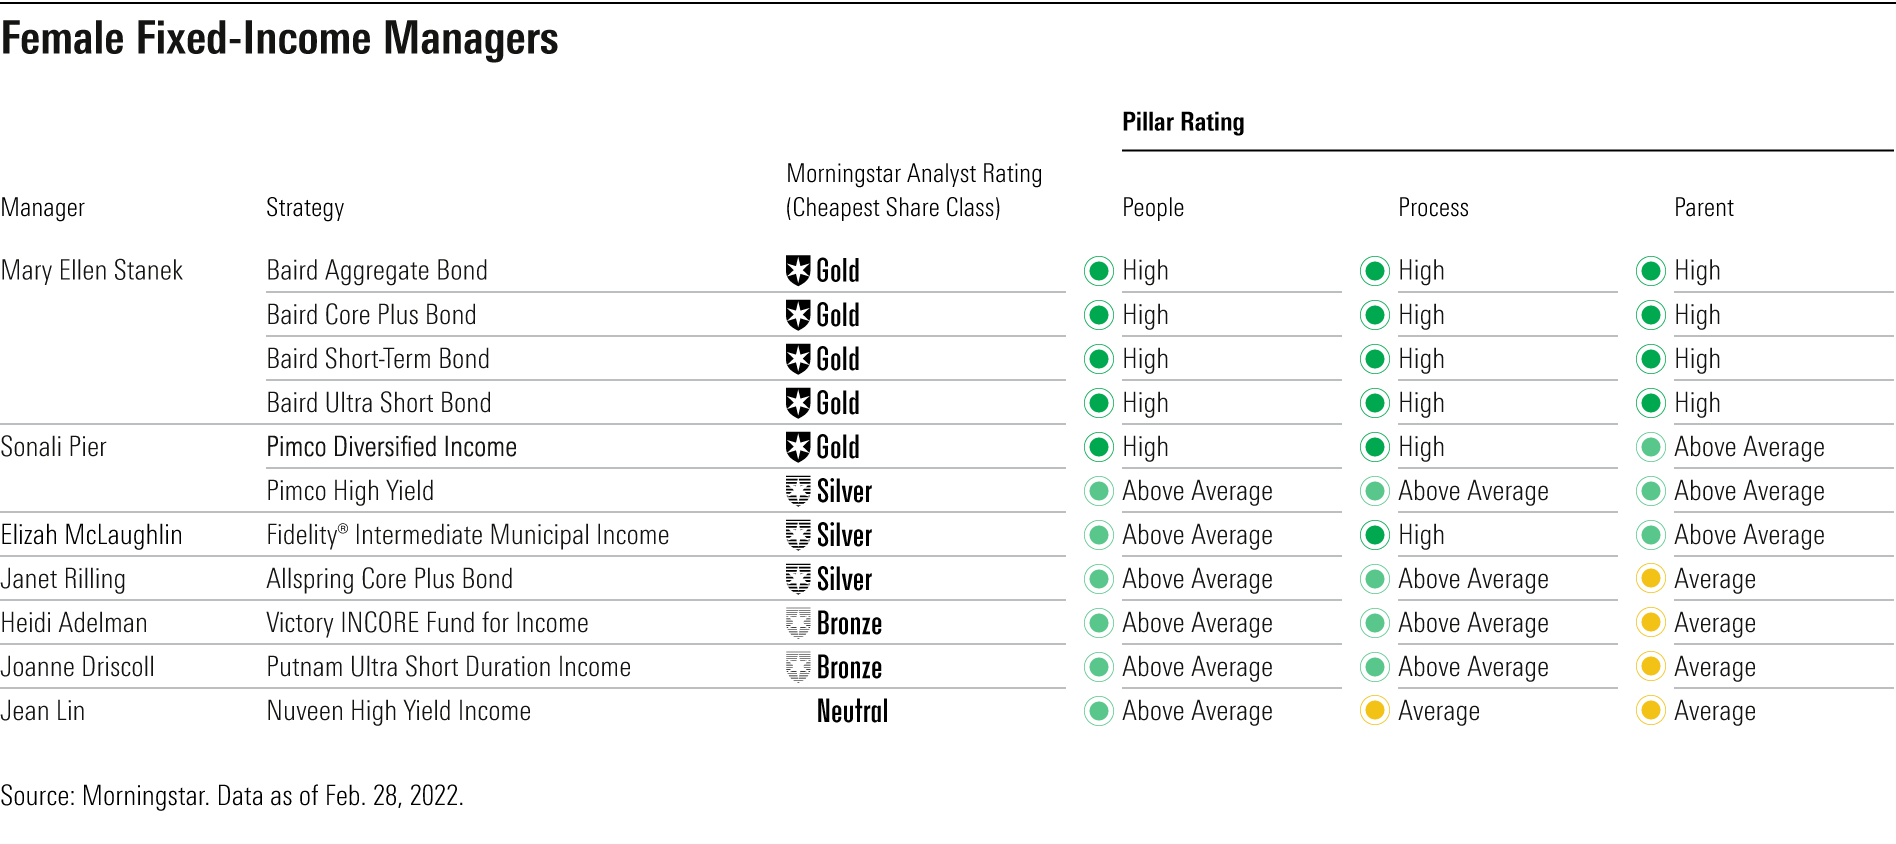 Lead female fixed-income managers or all-women management teams that earn a High or Above Average People Rating